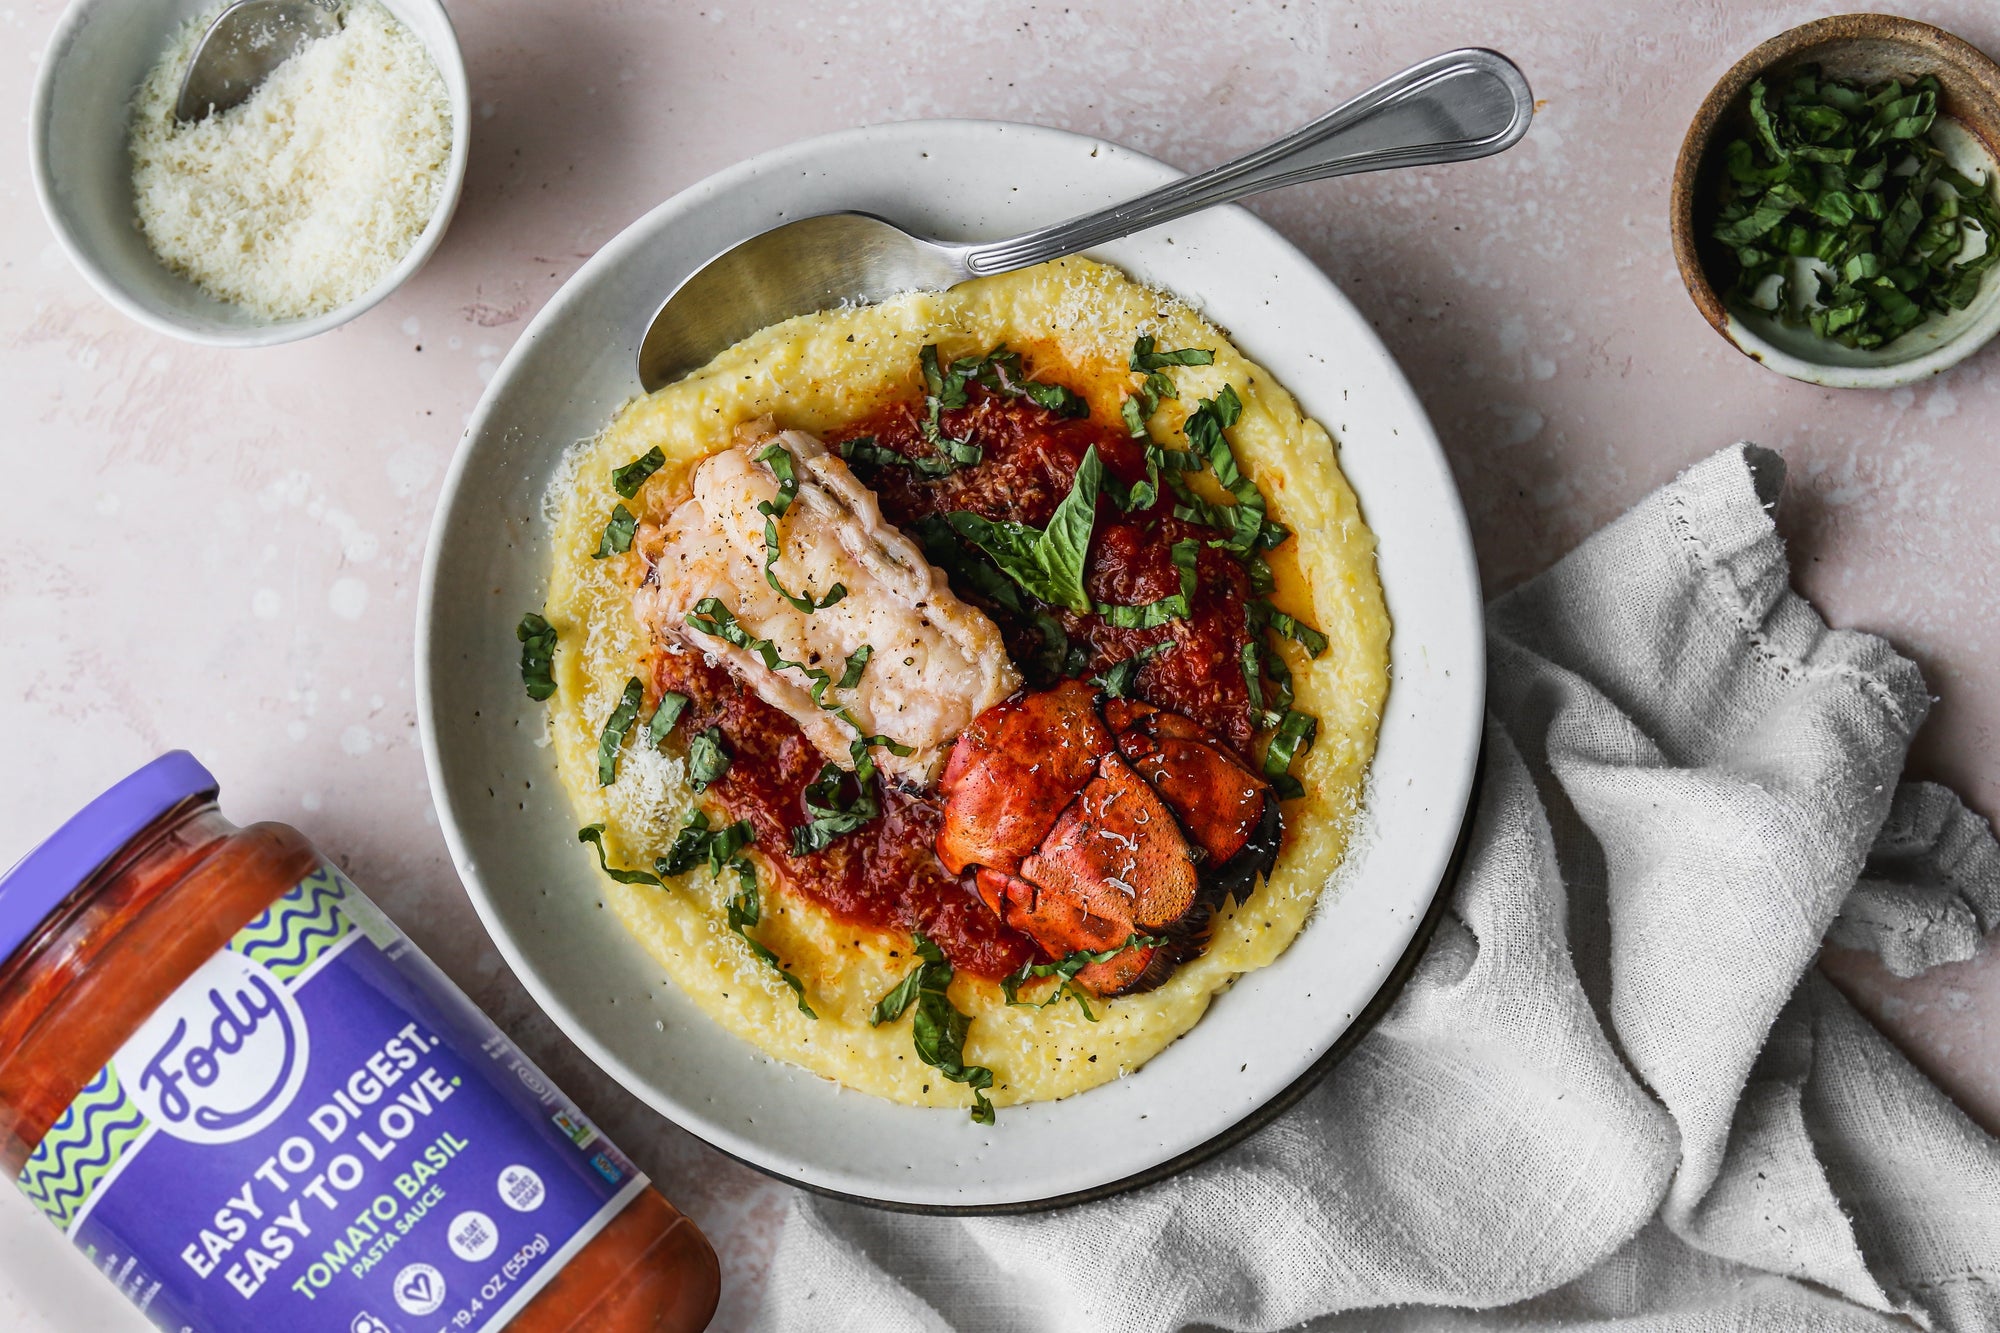 An image of Fody's broiled lobster with creamy tomato polenta. The lobster and polenta dish is sitting on a table in a bowl beside a jar of Fody's marinara sauce.